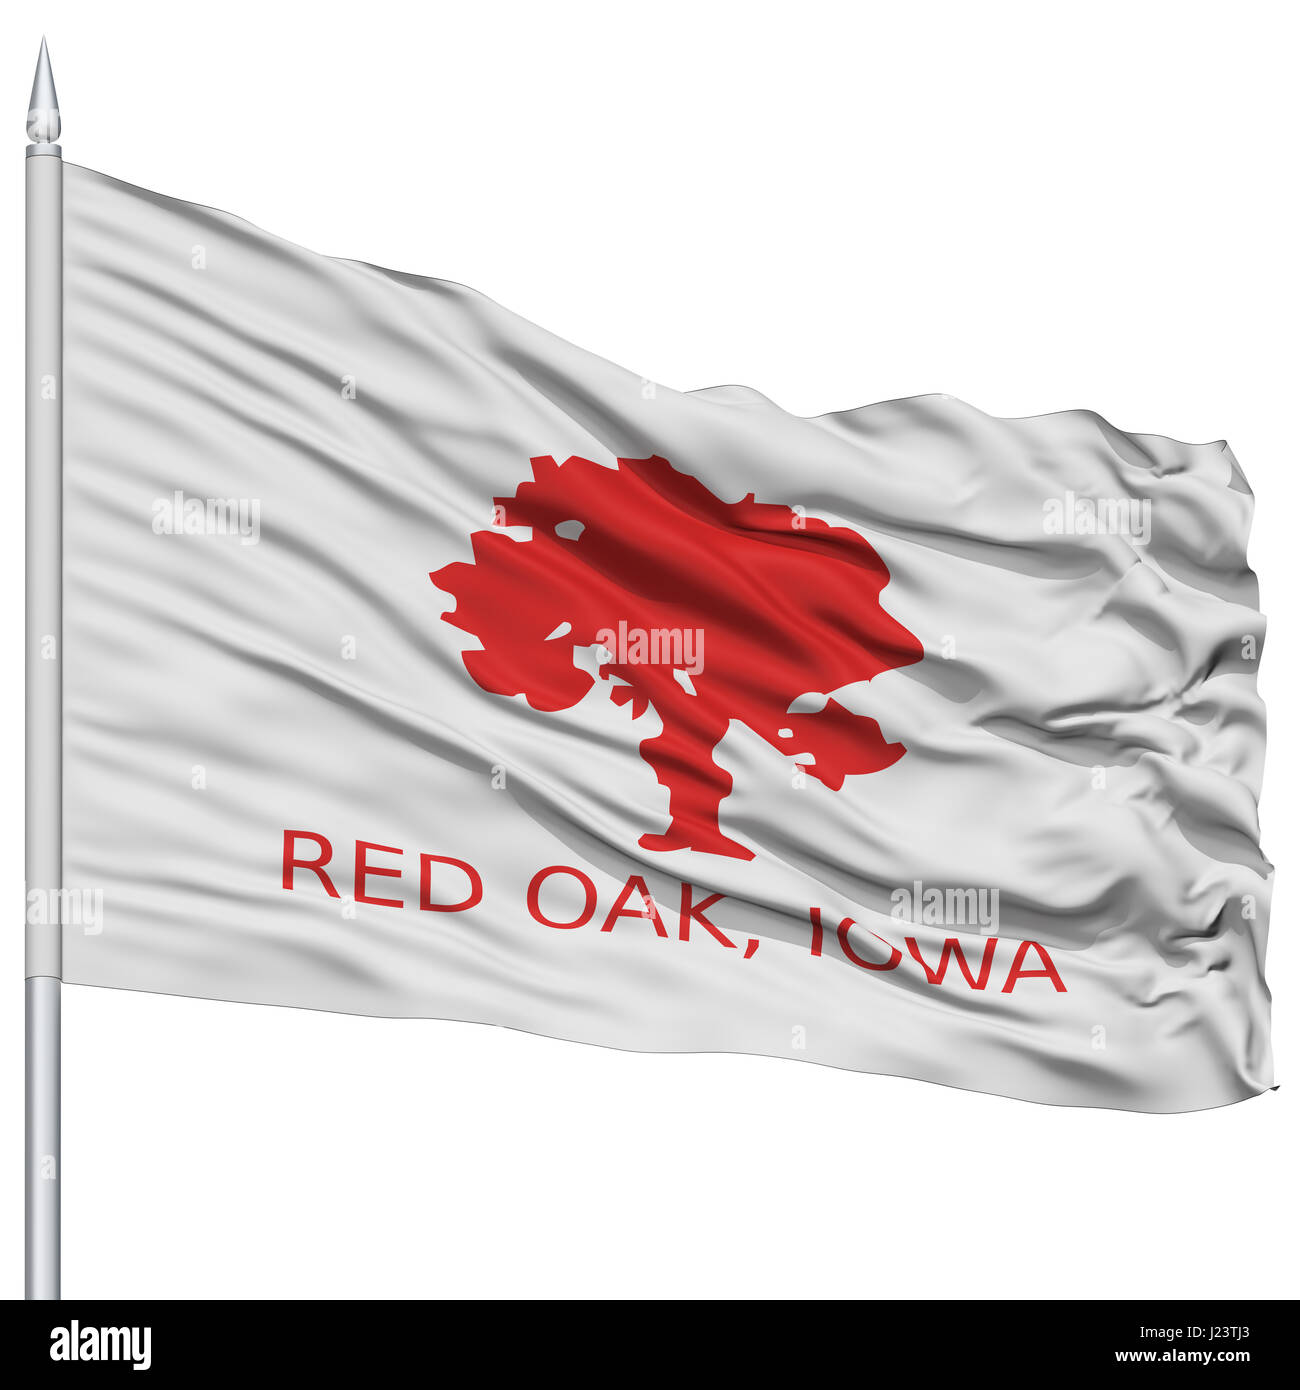 Red Oak City Flag on Flagpole, Iowa State, Flying in the Wind, Isolated on White Background Stock Photo